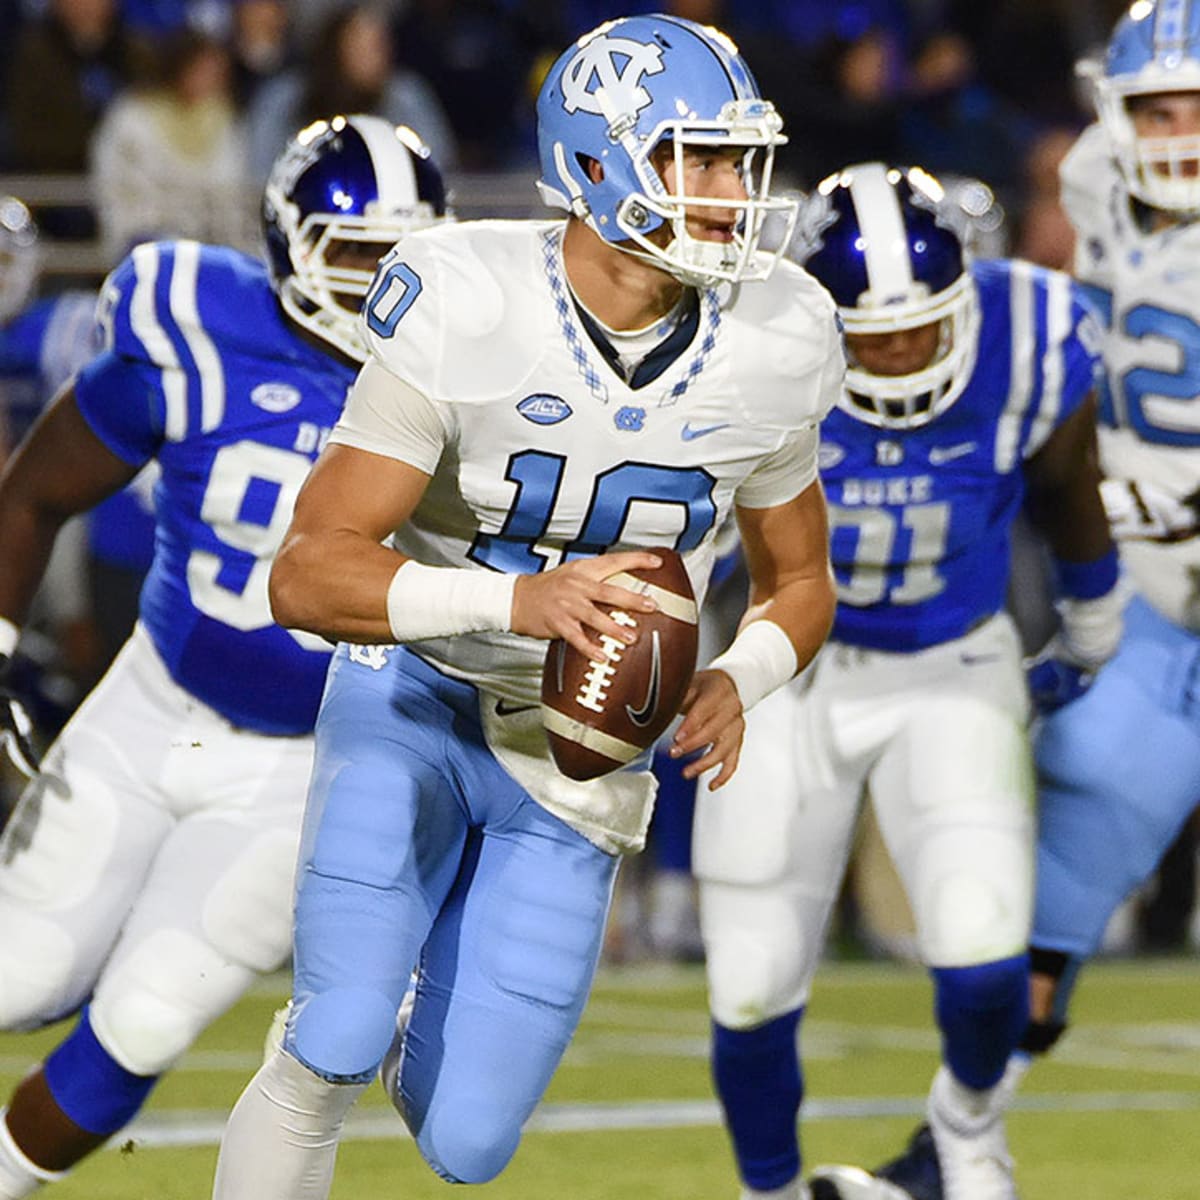 2017 NFL draft: How Mitch Trubisky became UNC's starting QB